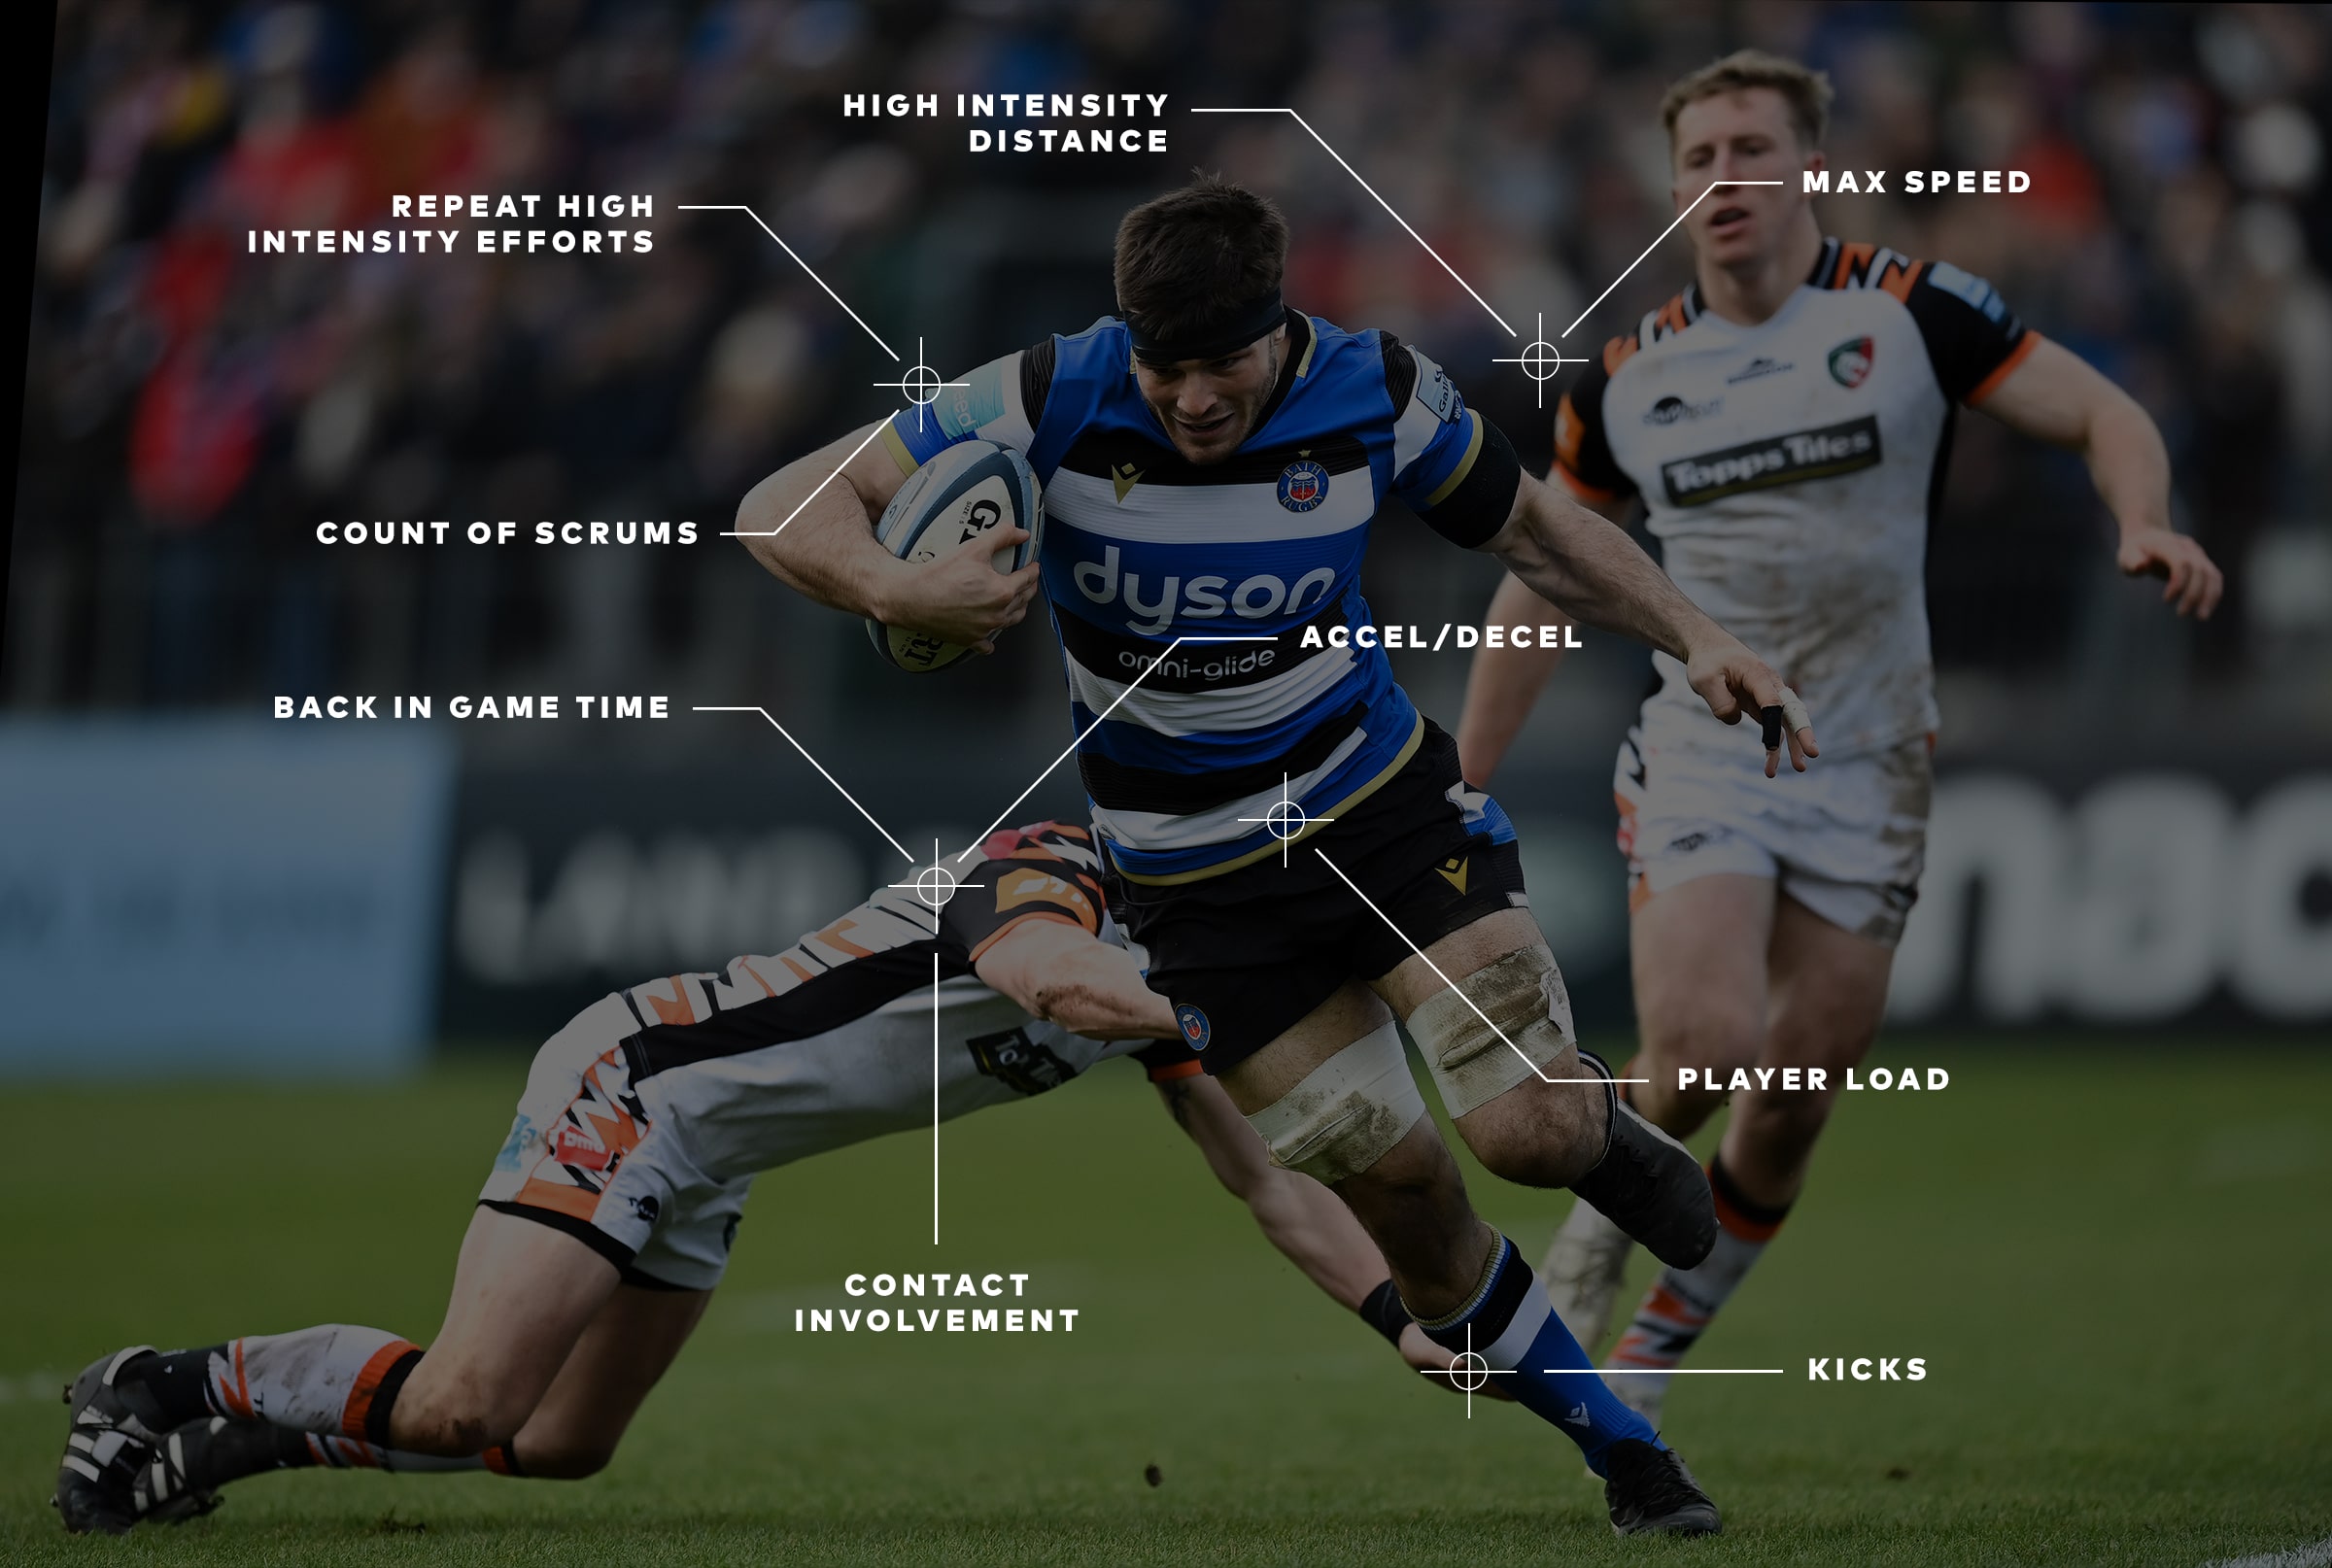 Rugby player running with the ball, with overlay text showing performance metrics such as high intensity distance, max speed, accelerations/decelerations, and player load.